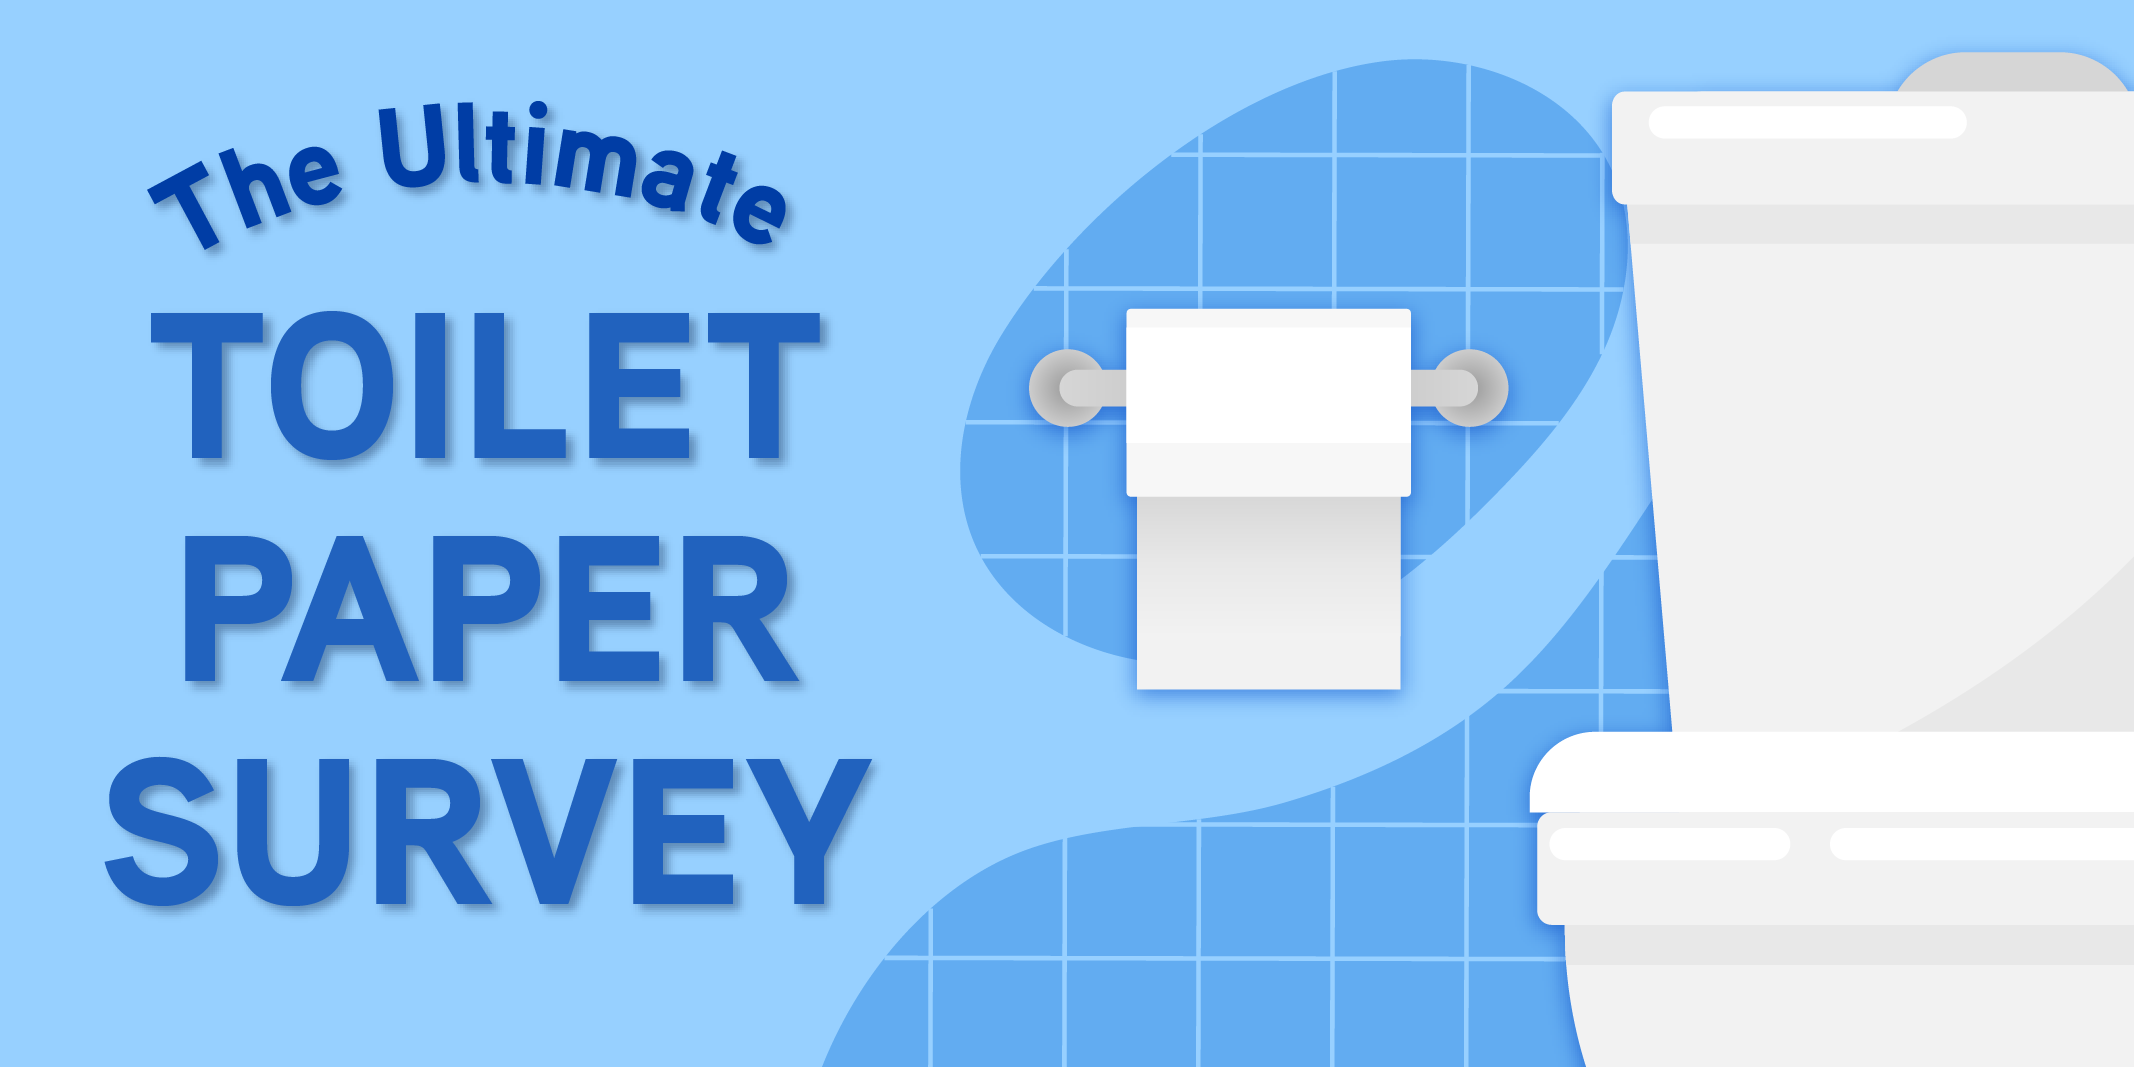 A header image for a blog about toilet paper use in the U.S.